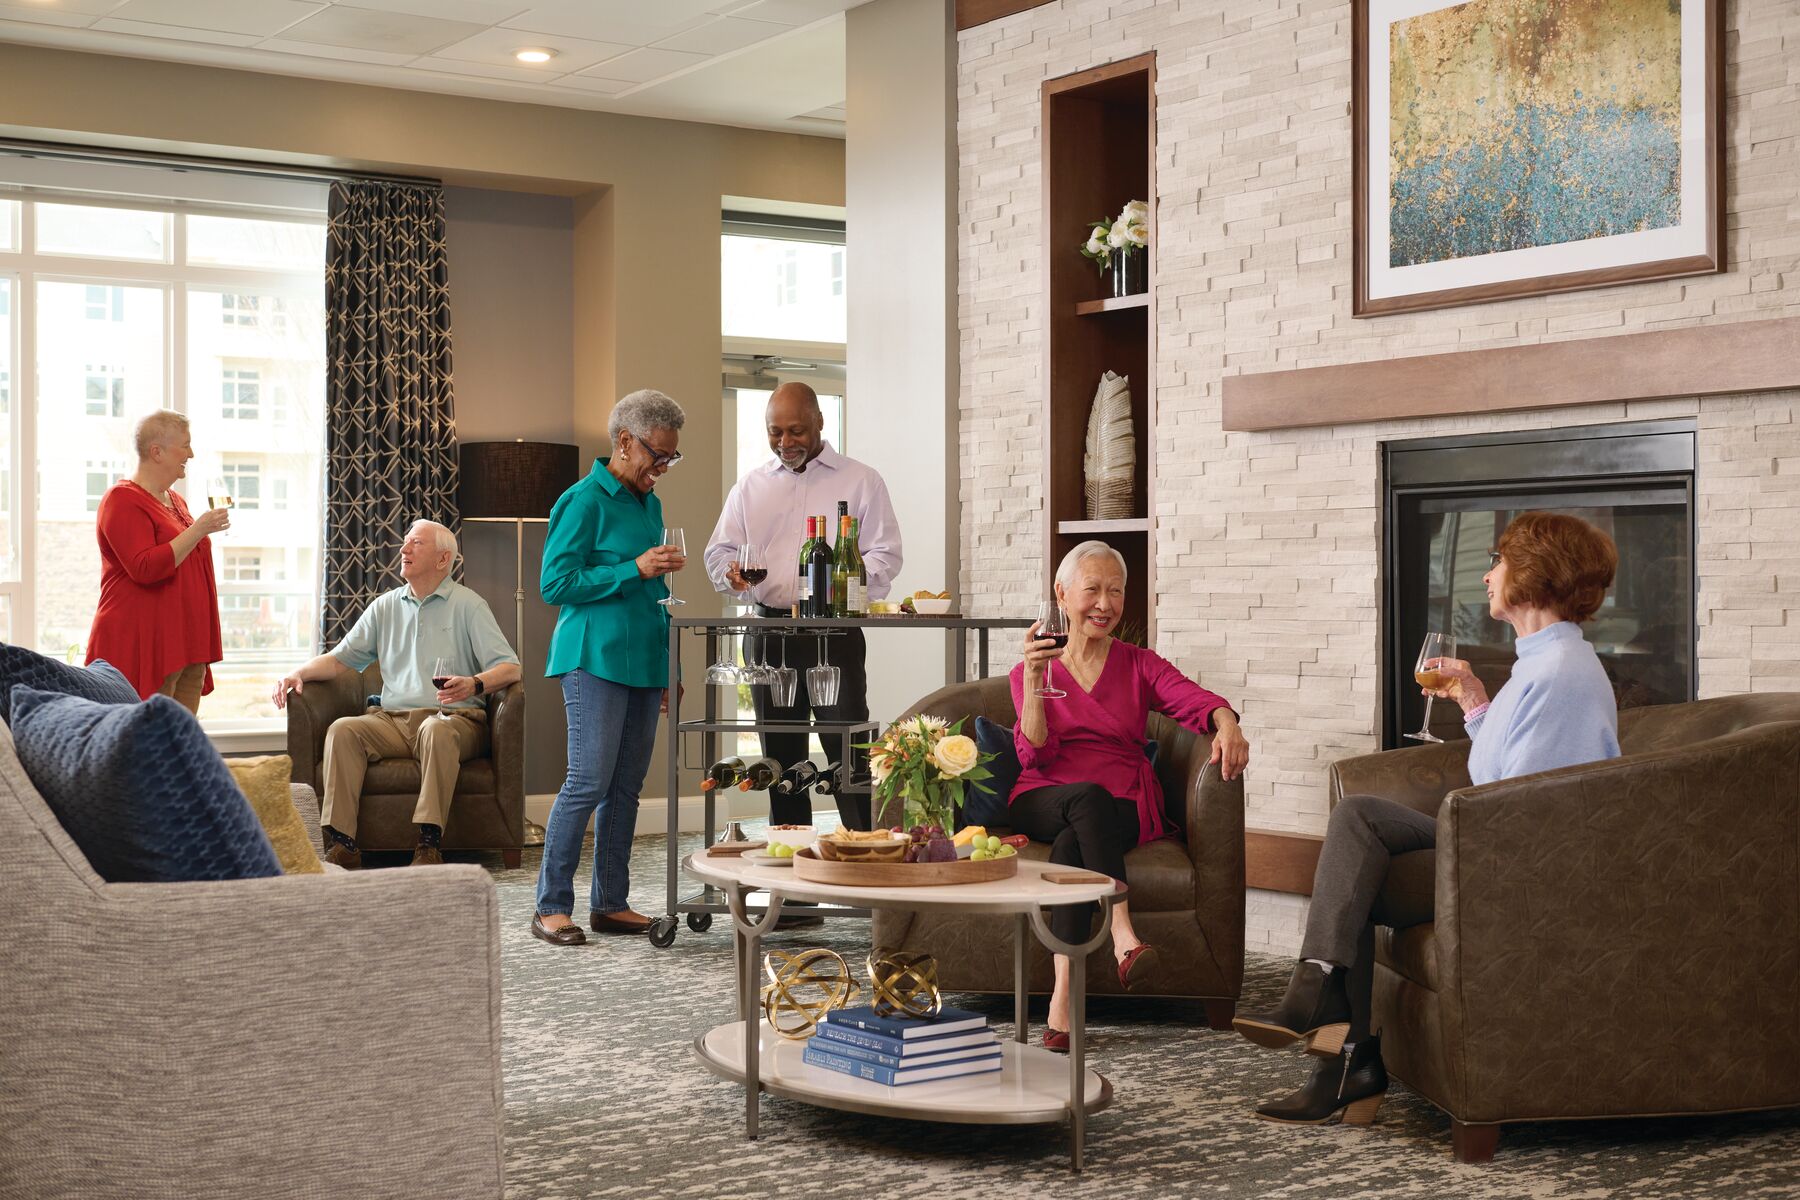 A diverse group of residents gathered in a community clubhouse.